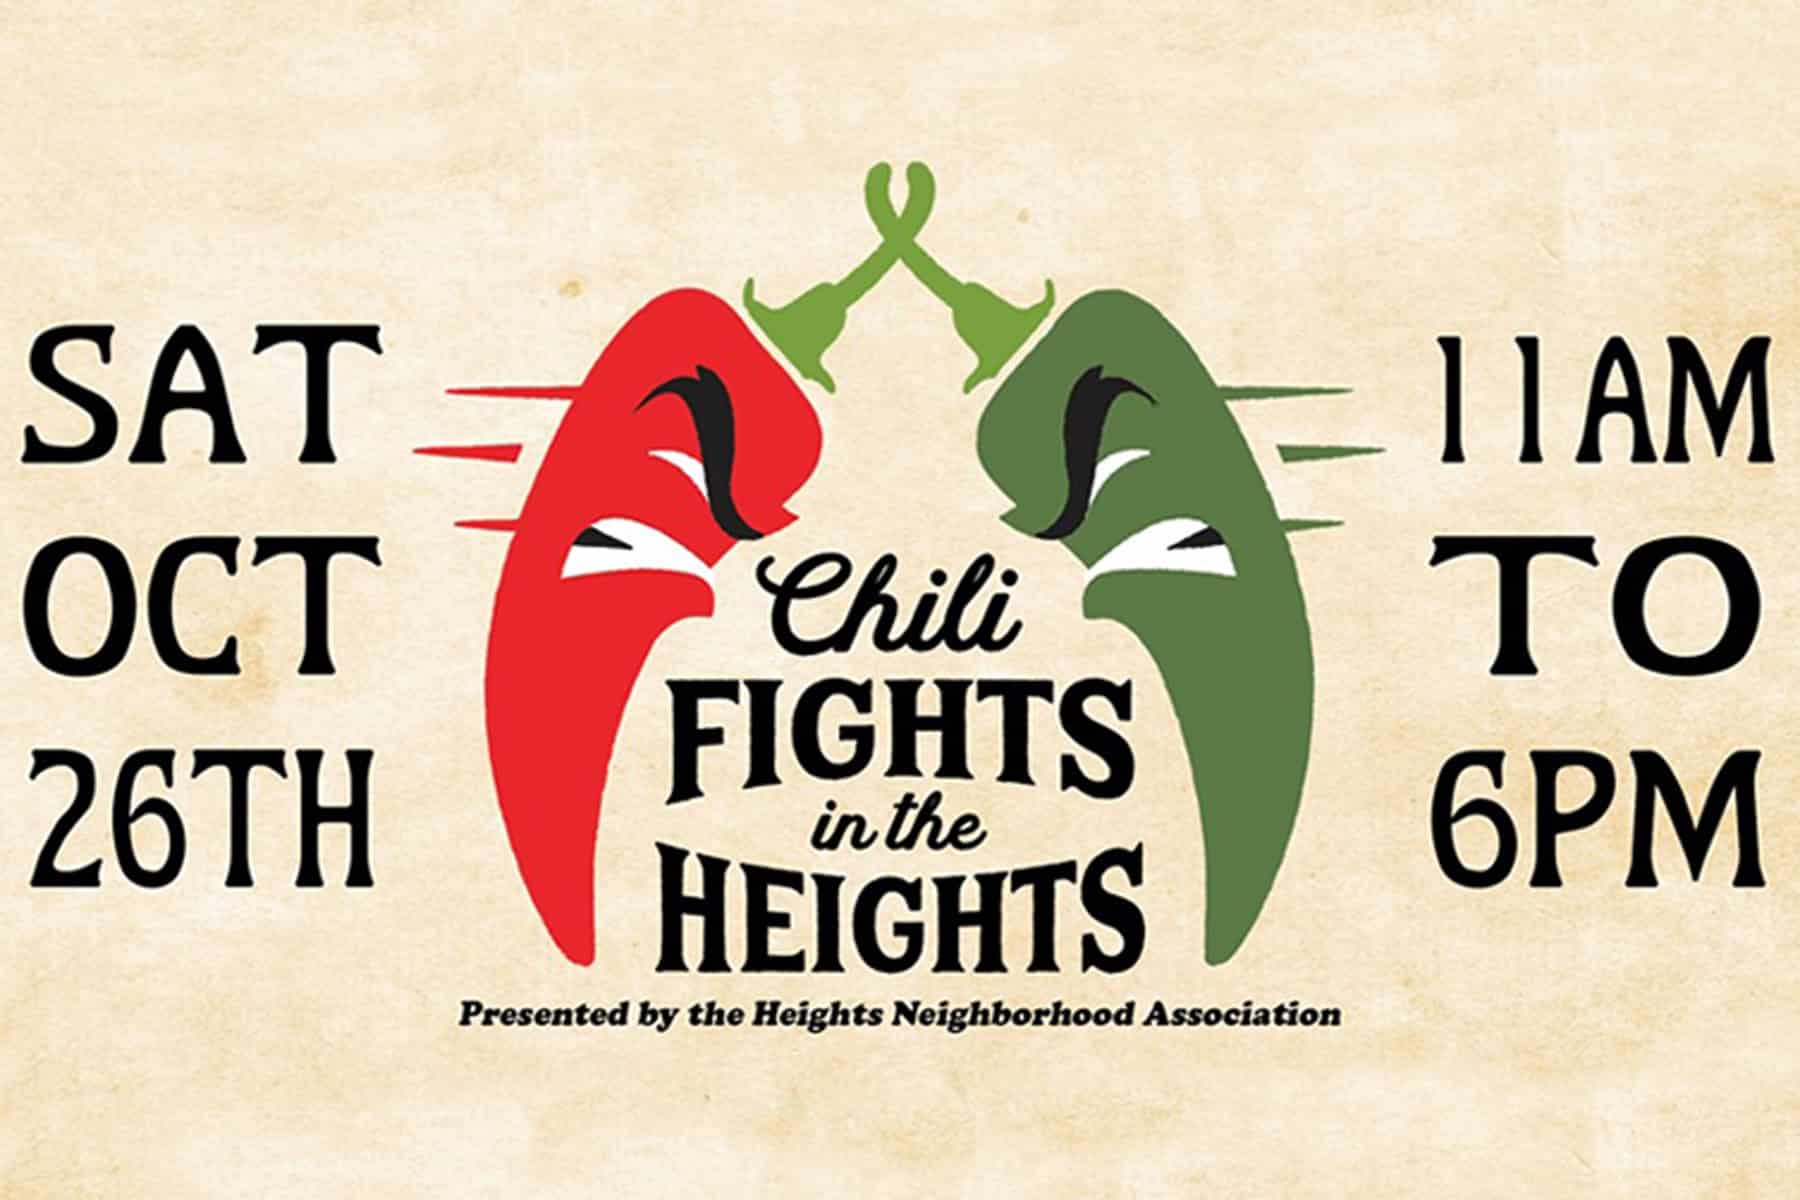 CHILI FIGHTS Takes To New HEIGHTS Thanks To The Hat Club Inviting